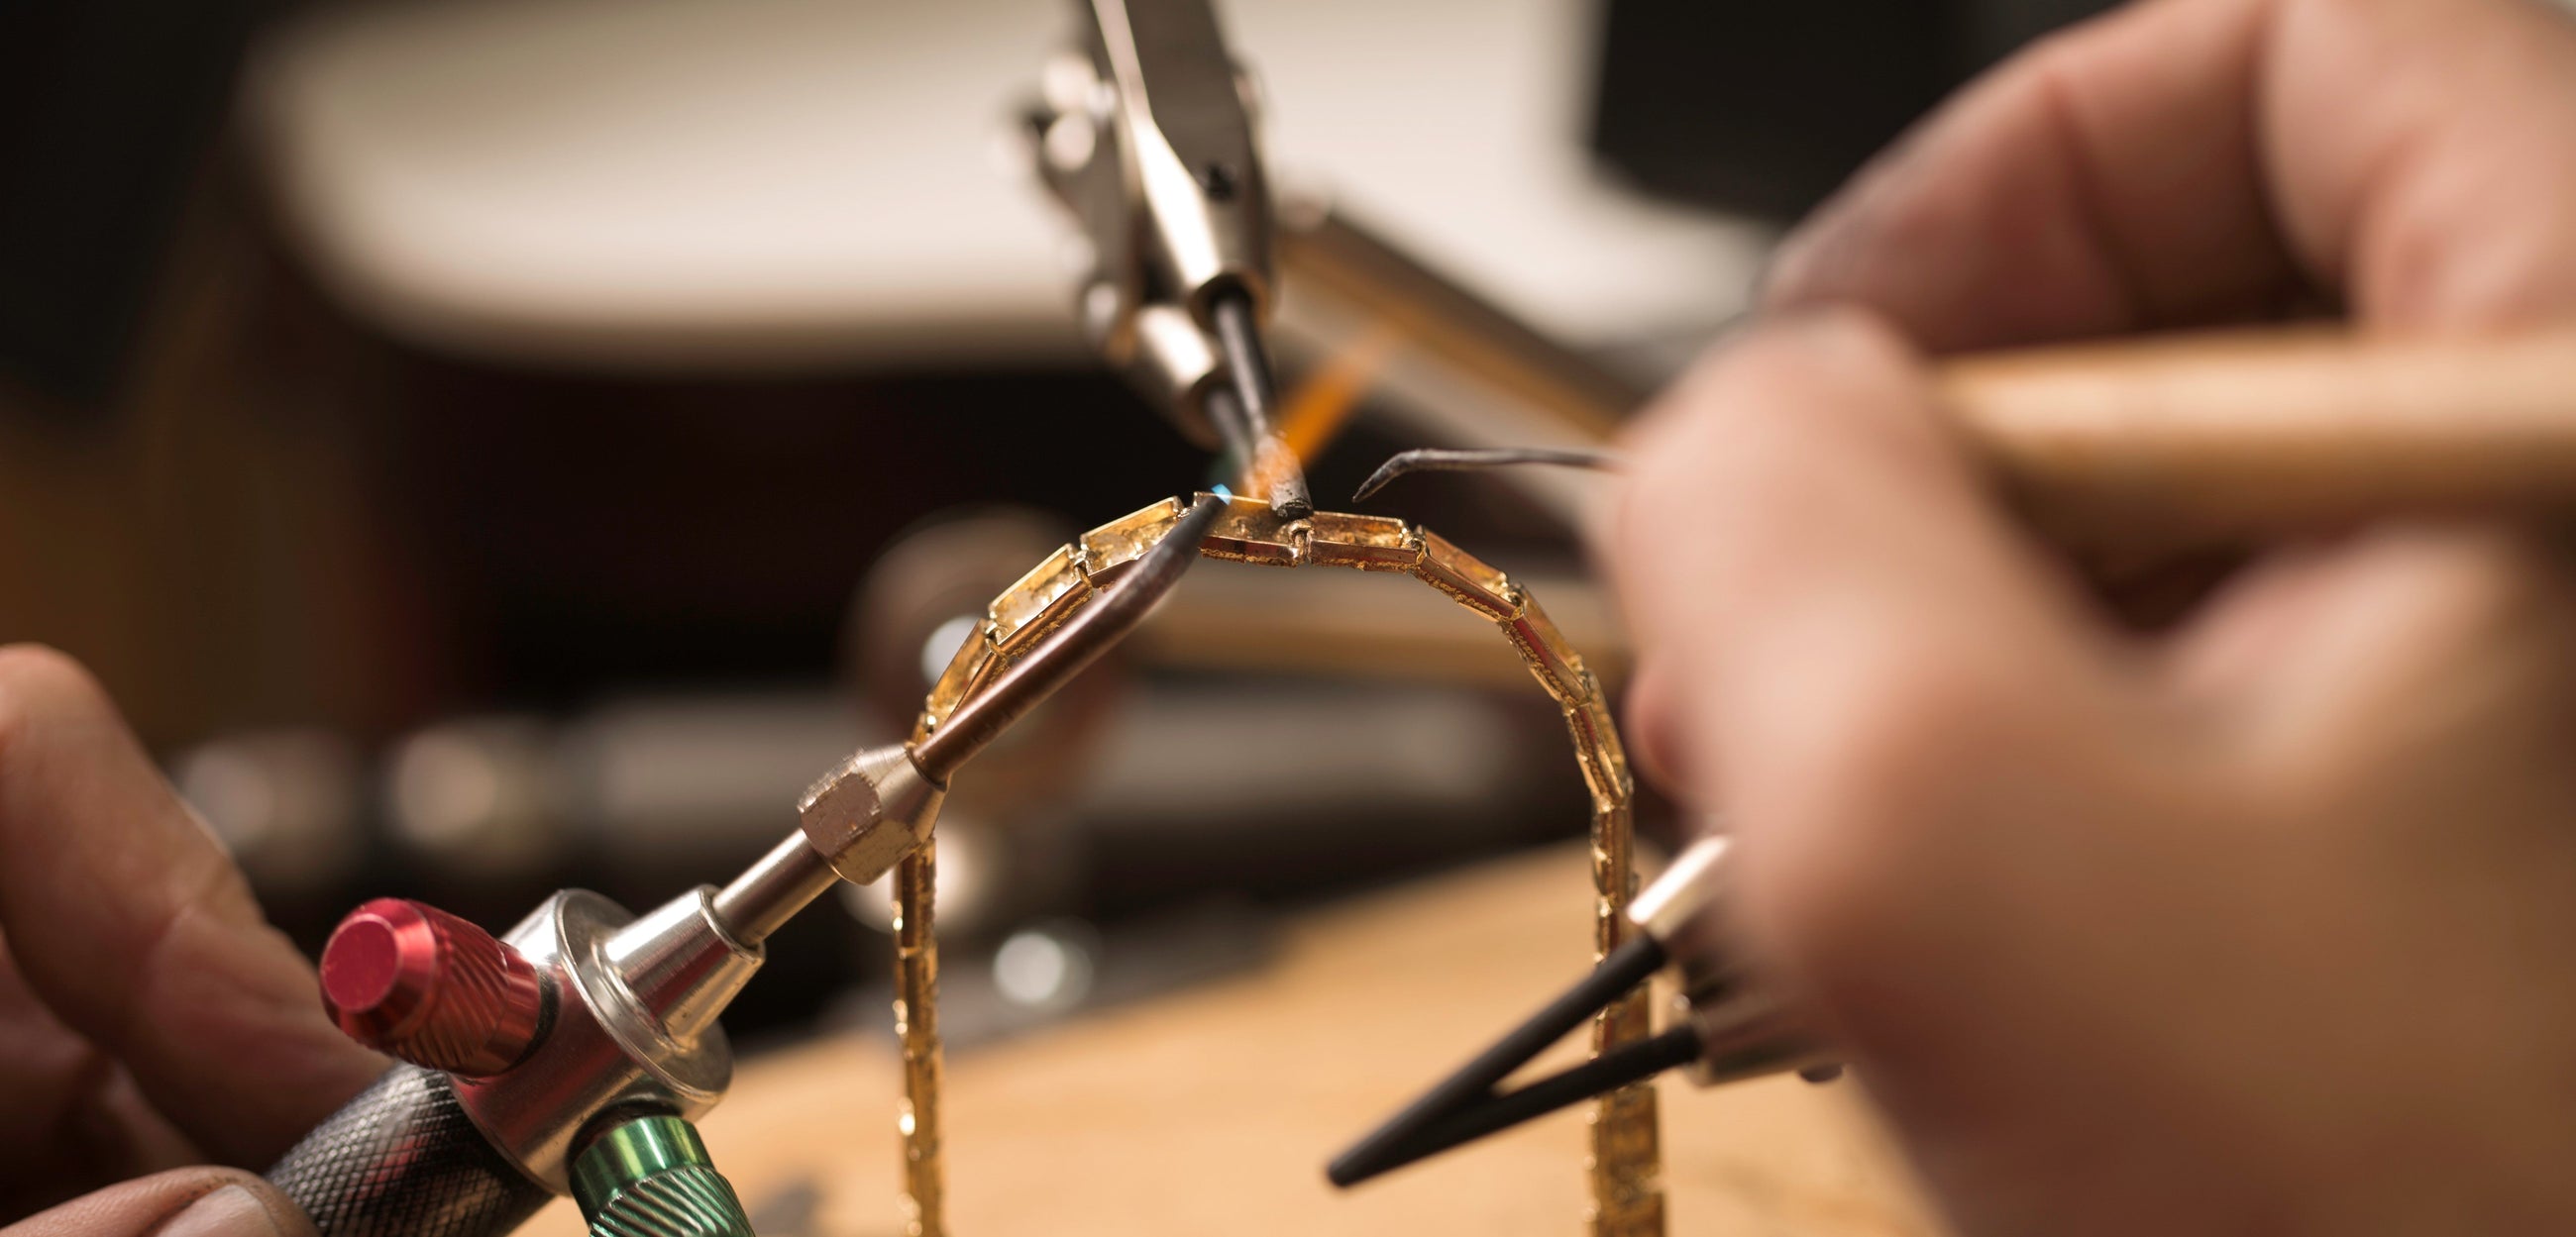 An Independent jeweller making a gold bracelet by hand.